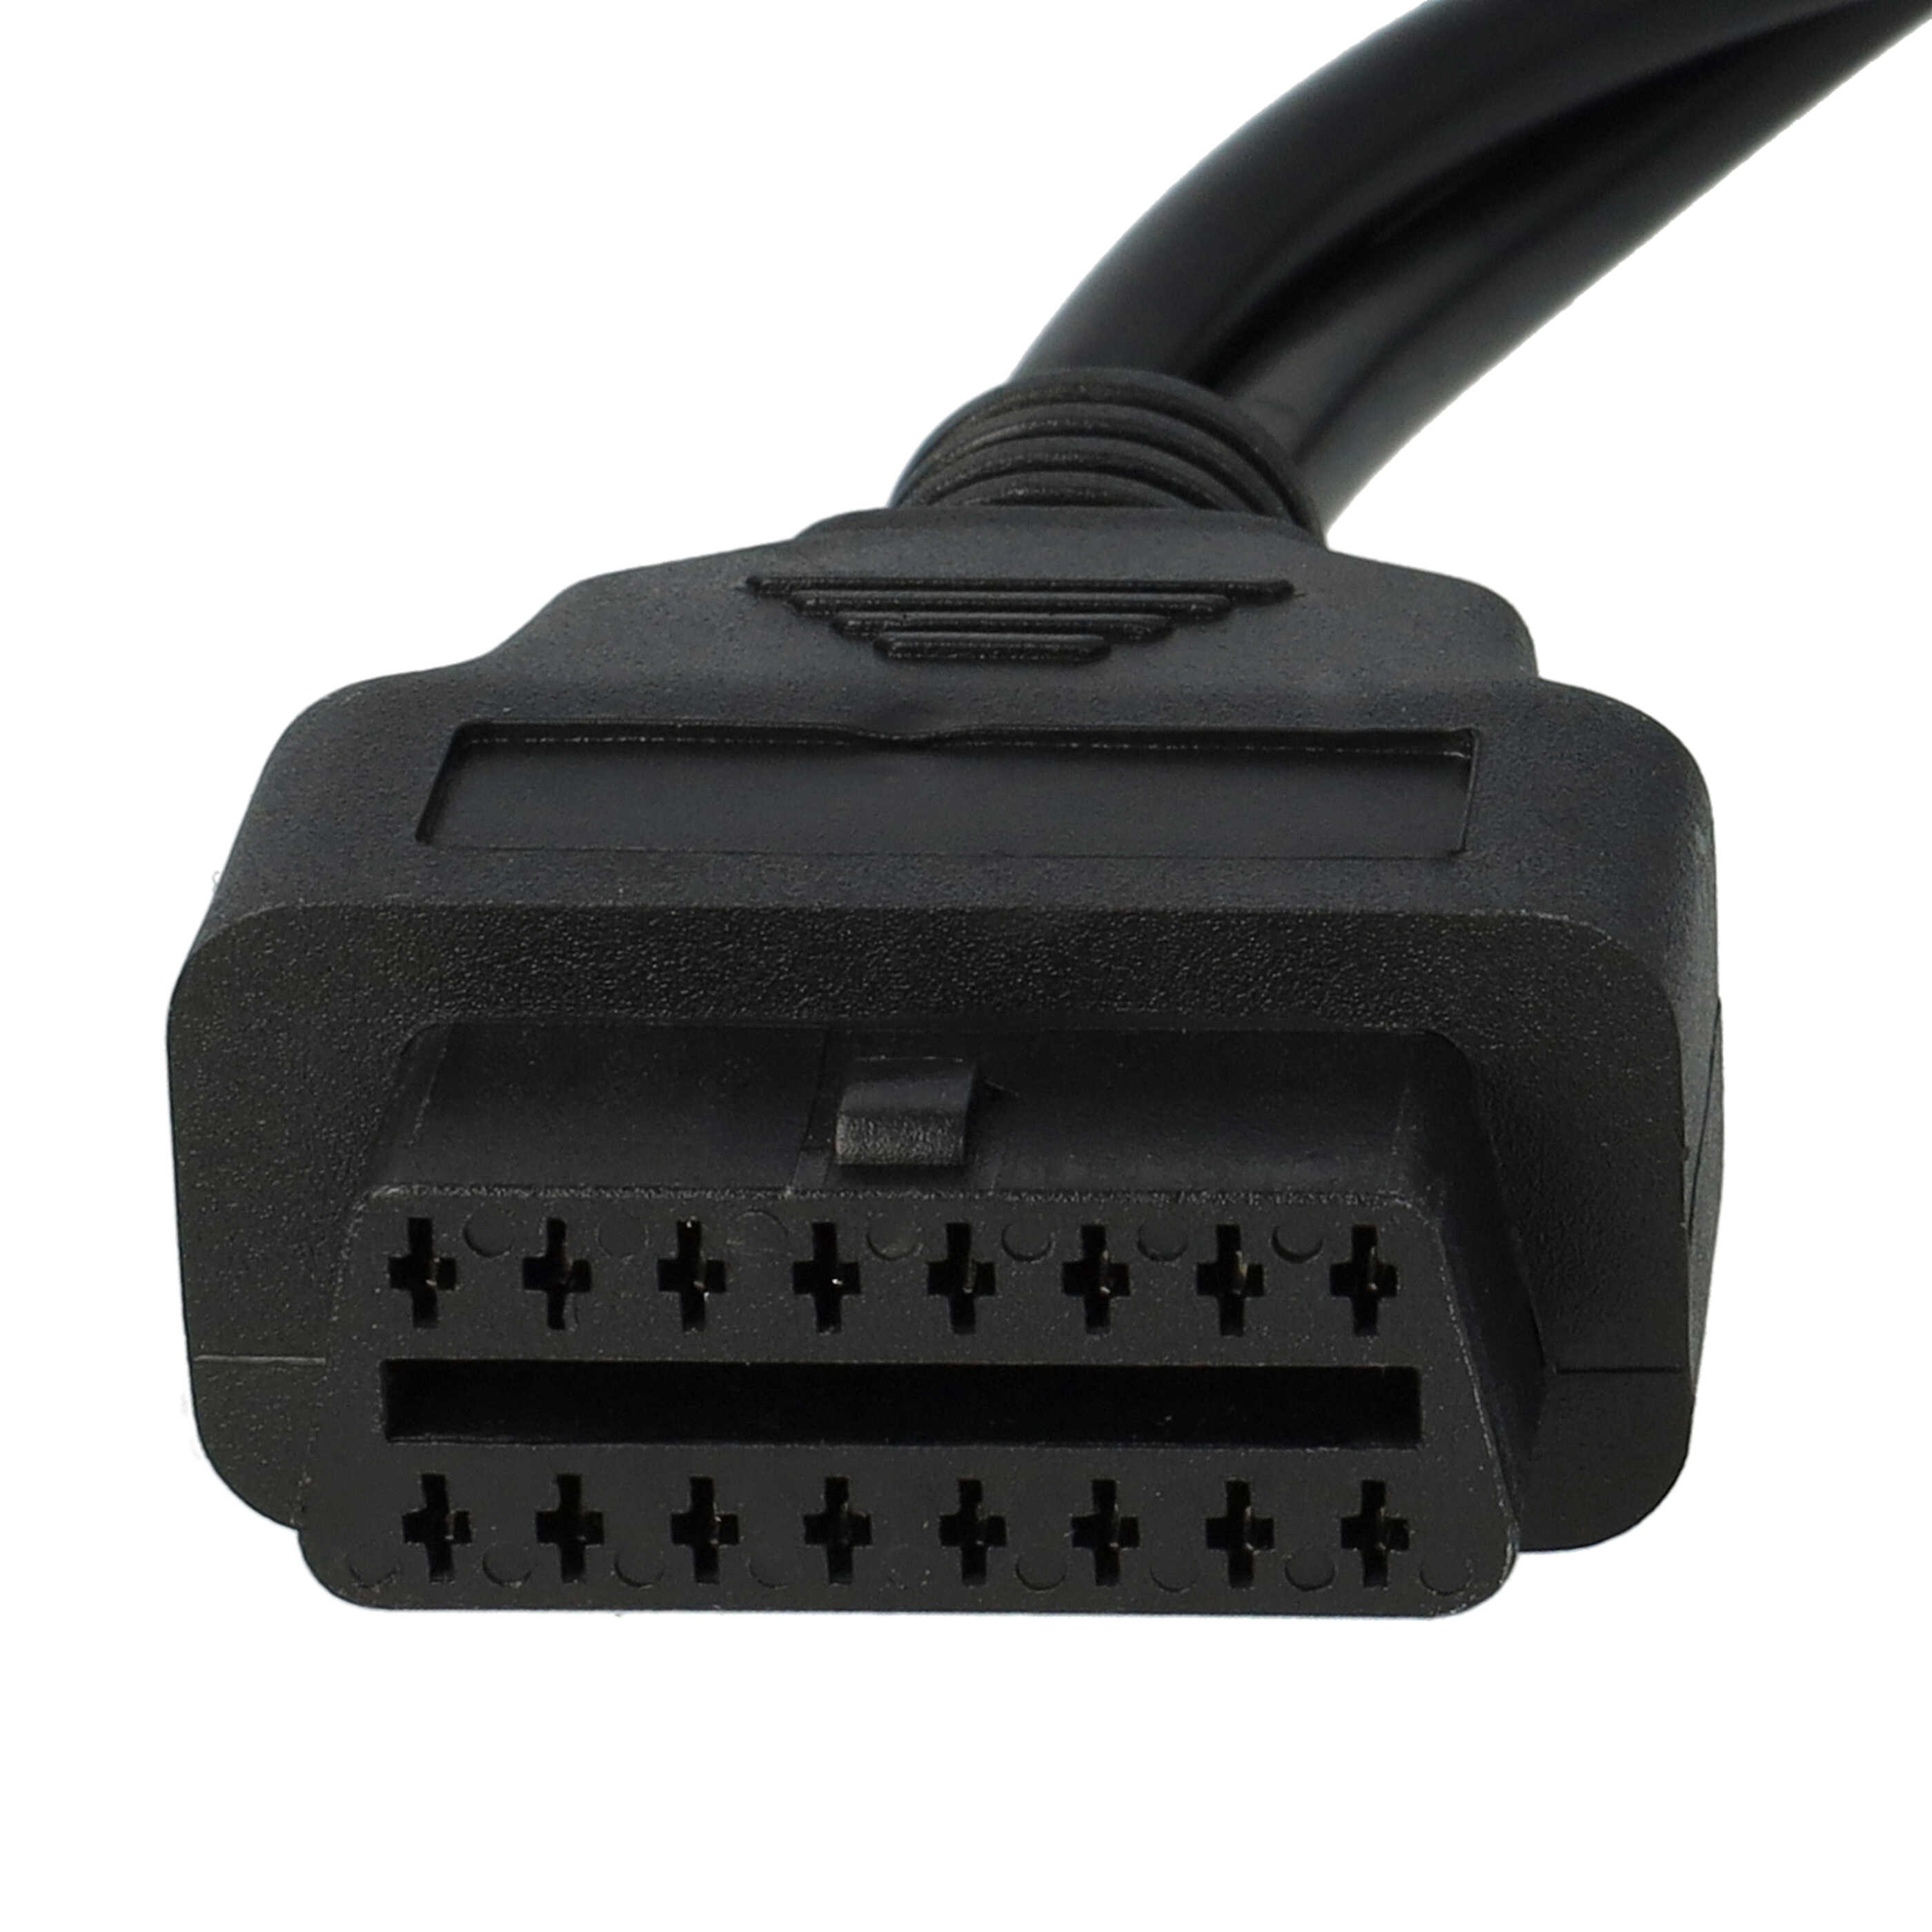 vhbw OBD2 Adapter 3 Pin, 4 Pin to OBD2 16Pin suitable for FJR 1300 Yamaha 2016-2019 Motorbike - 20 cm